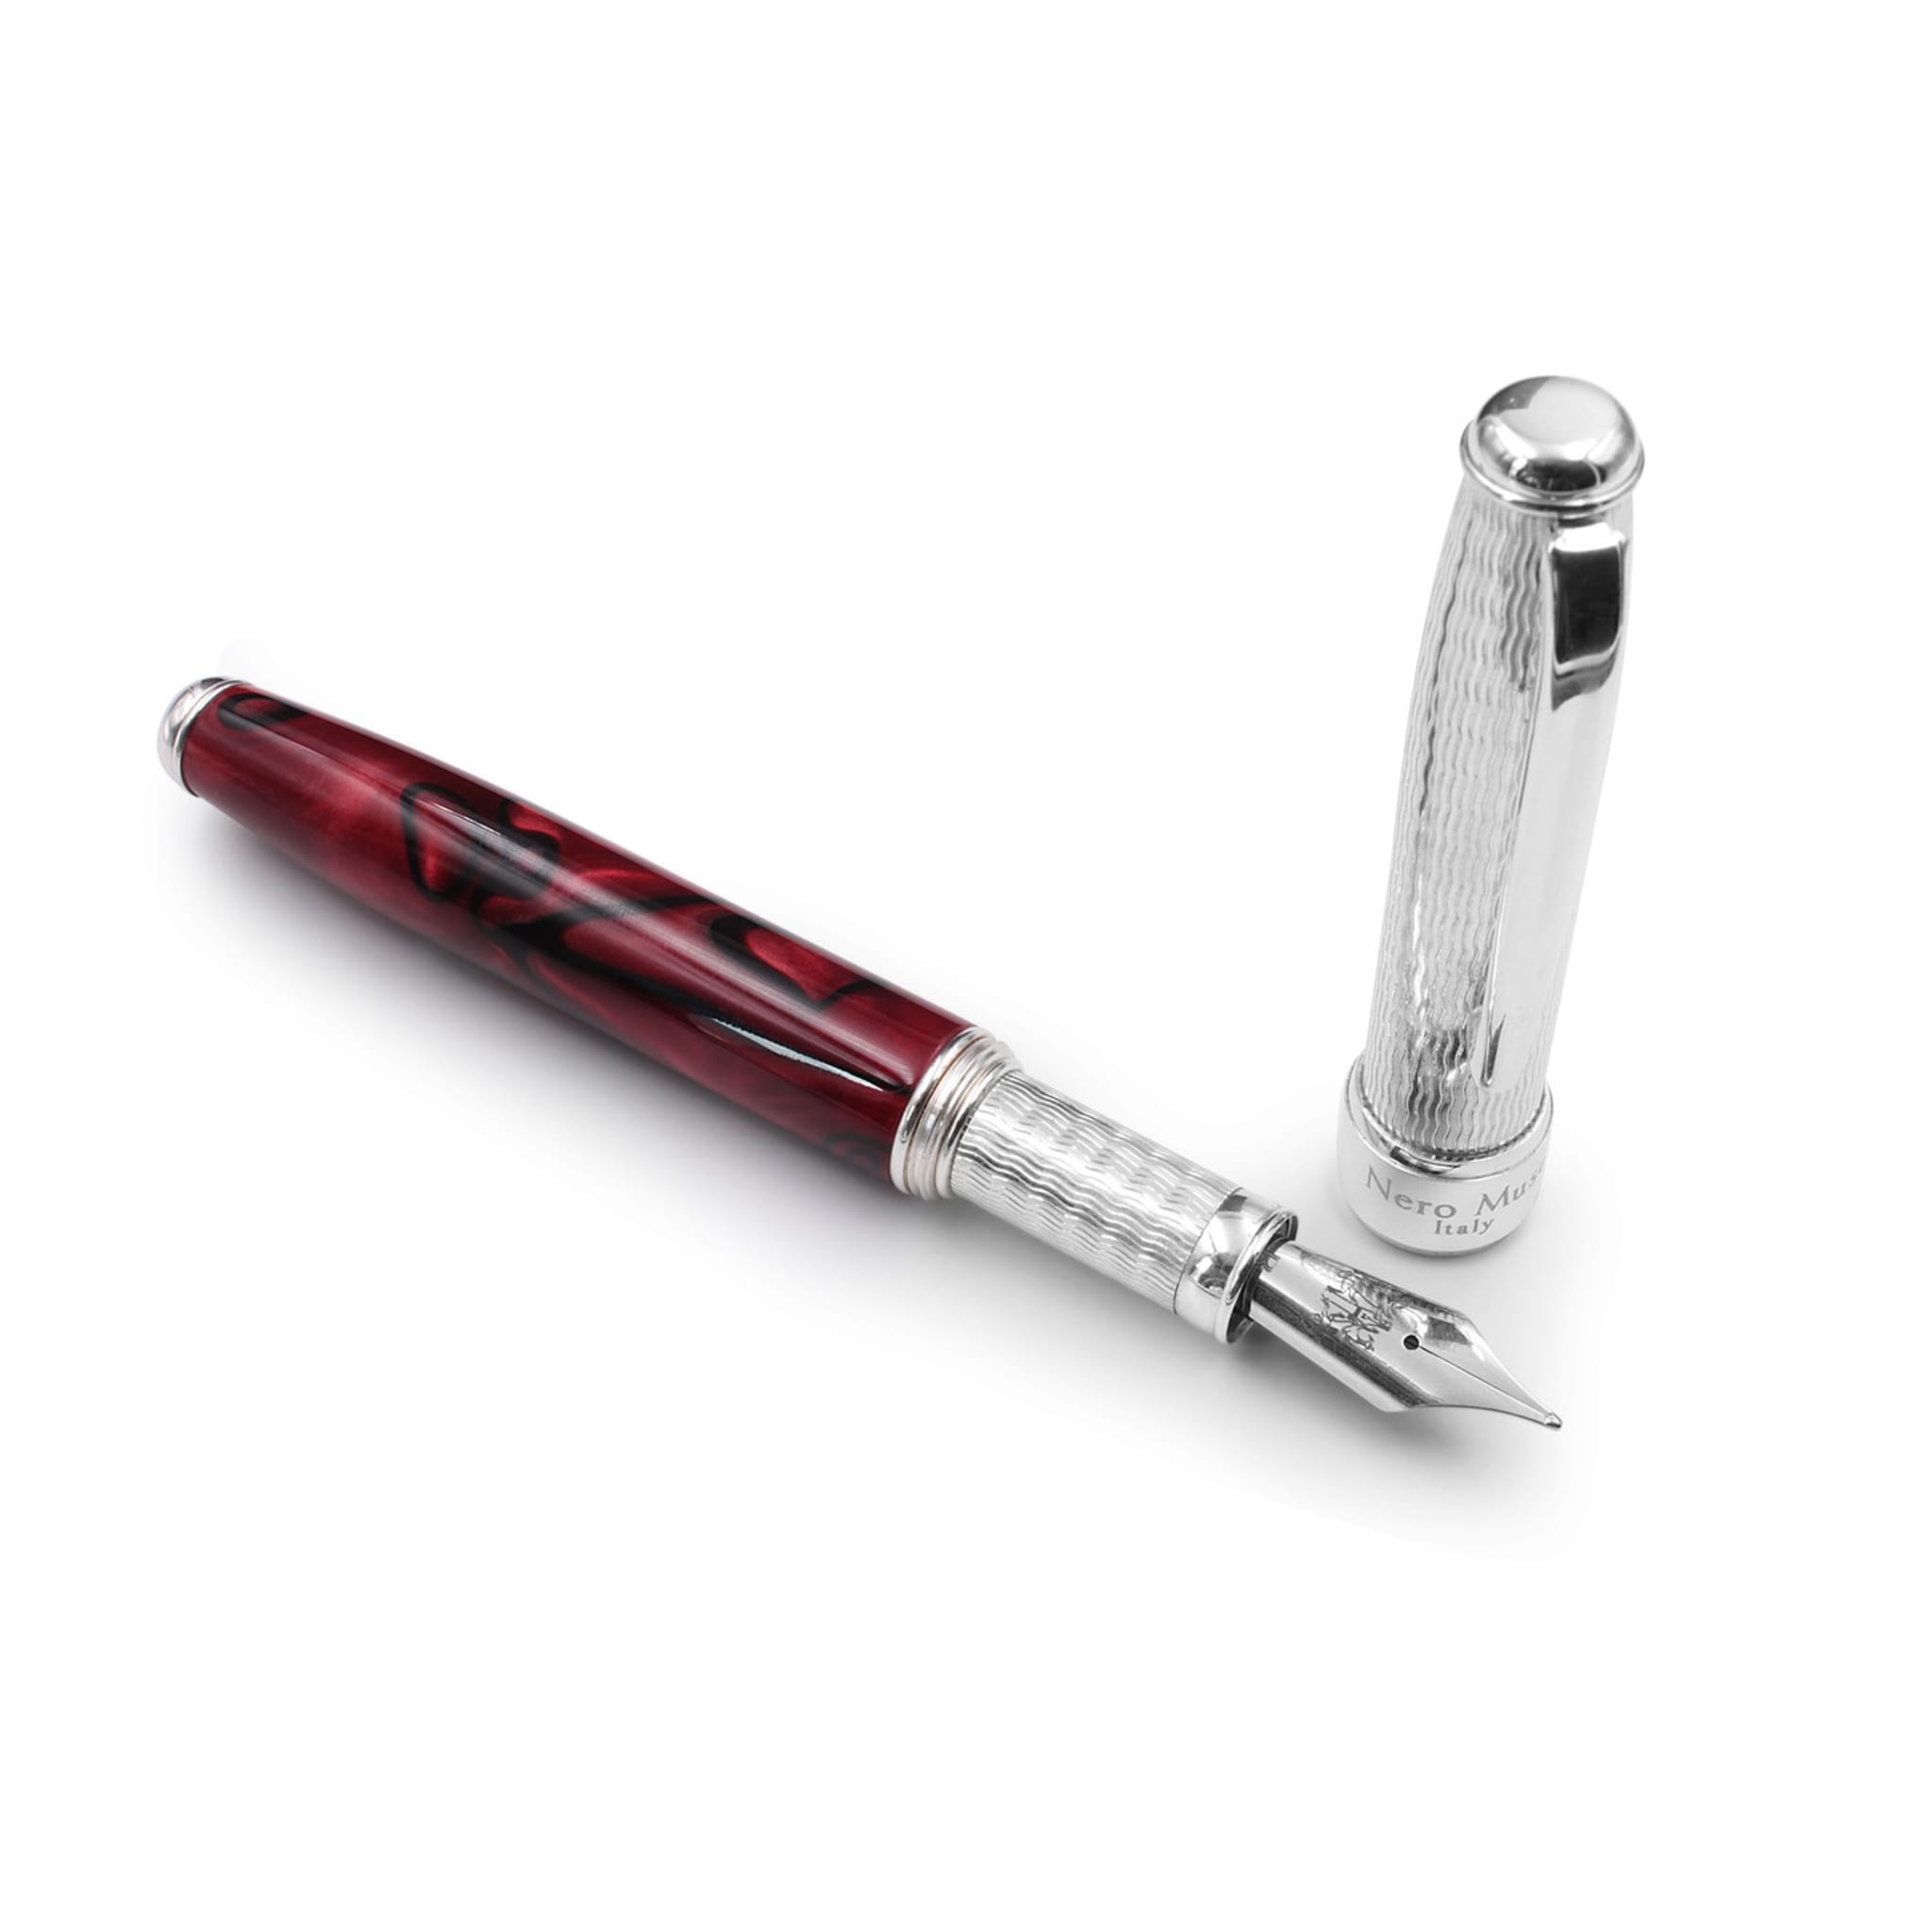 Silver and Burgundy Resin Fountain Pen - Alternative view 3